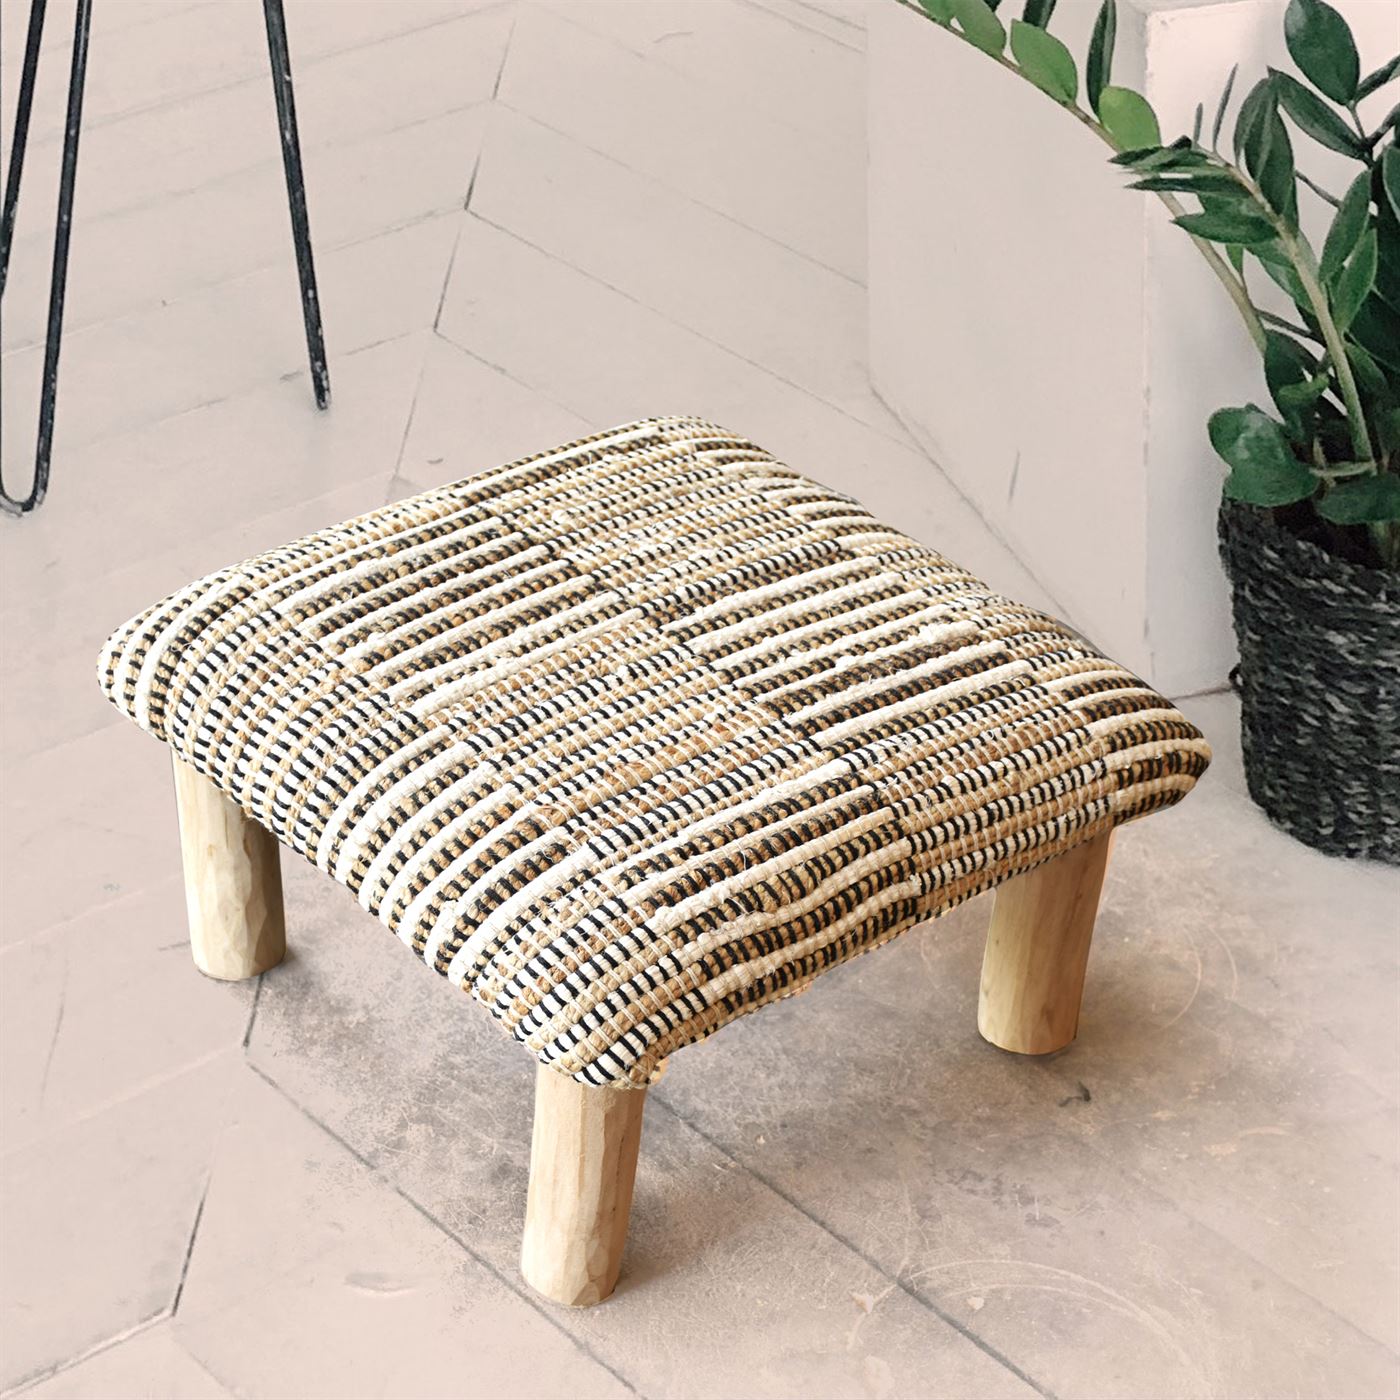 Rodeo Foot Stool, Hemp, Recycled Cotton, Natural White, Natural, Pitloom, Flat Weave 